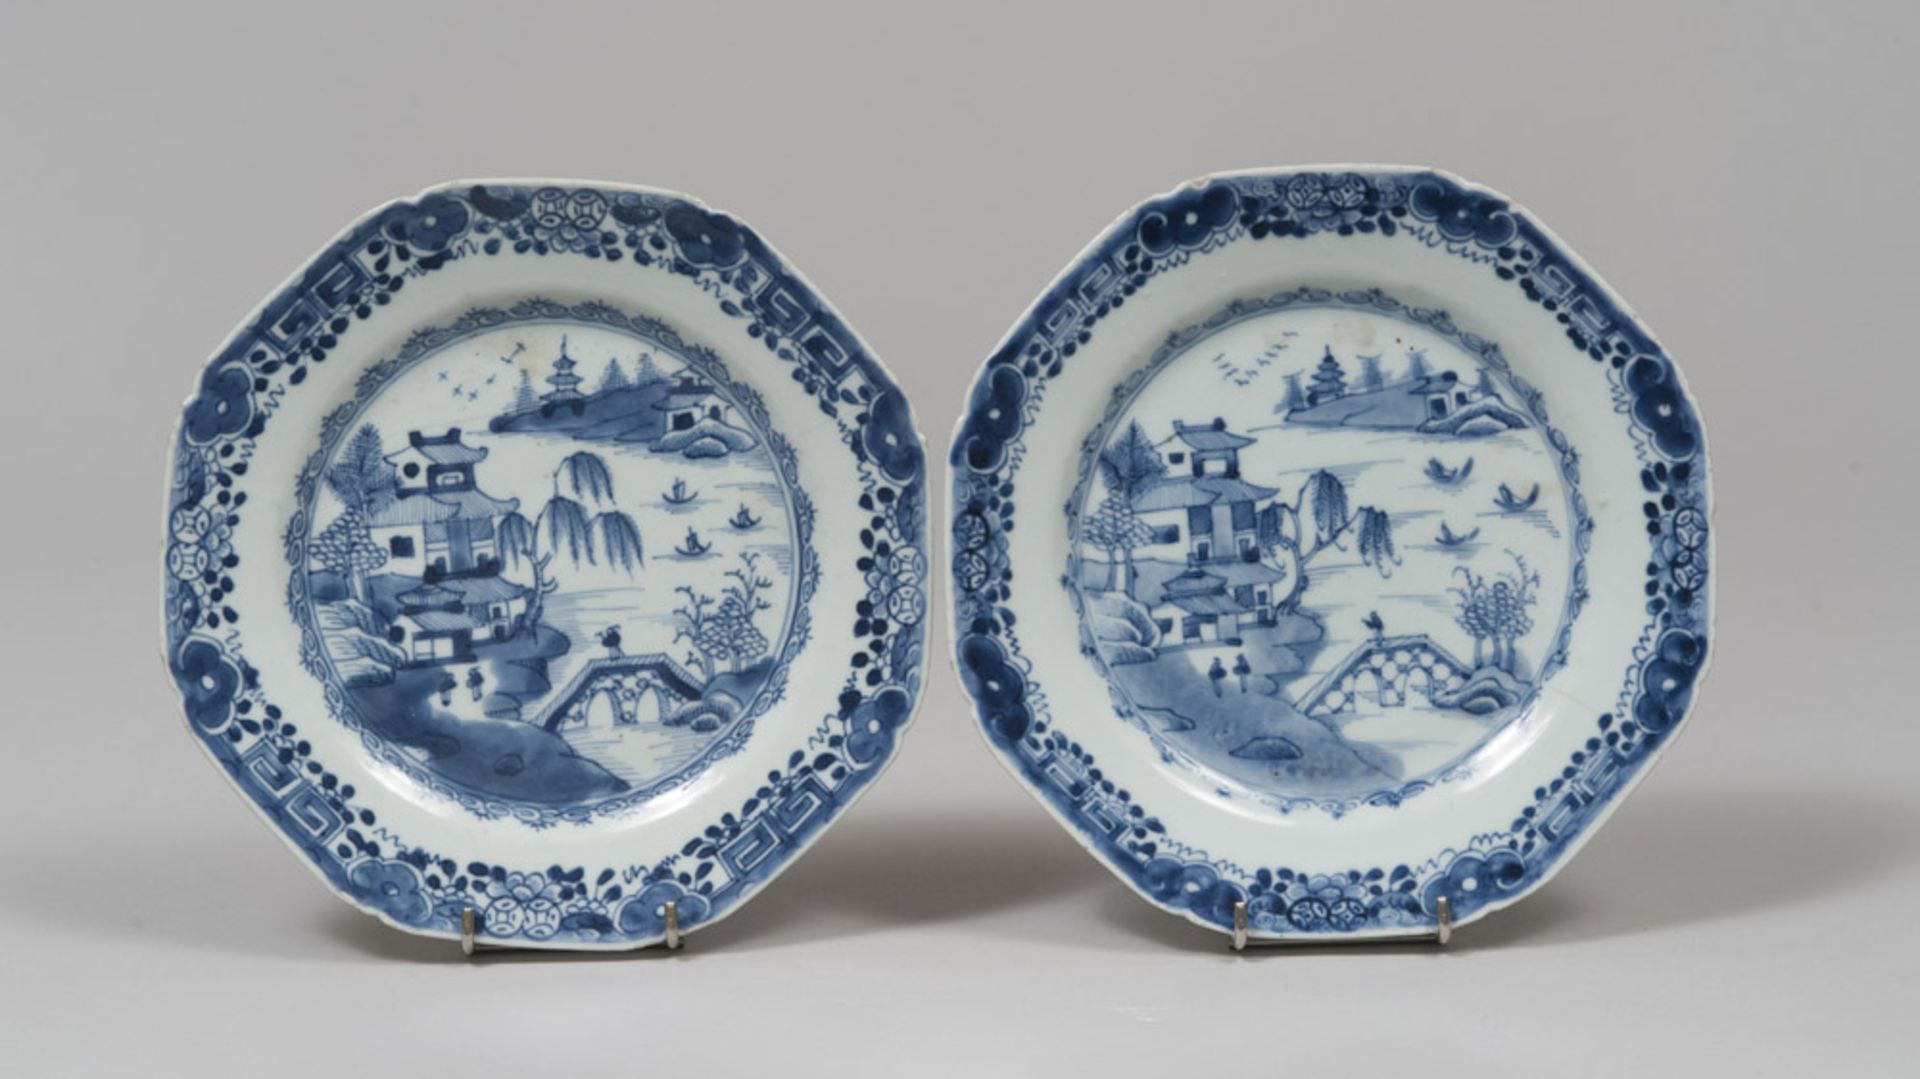 A PAIR OF WHITE AND BLUE PORCELAIN DISHES, 19TH CENTURY